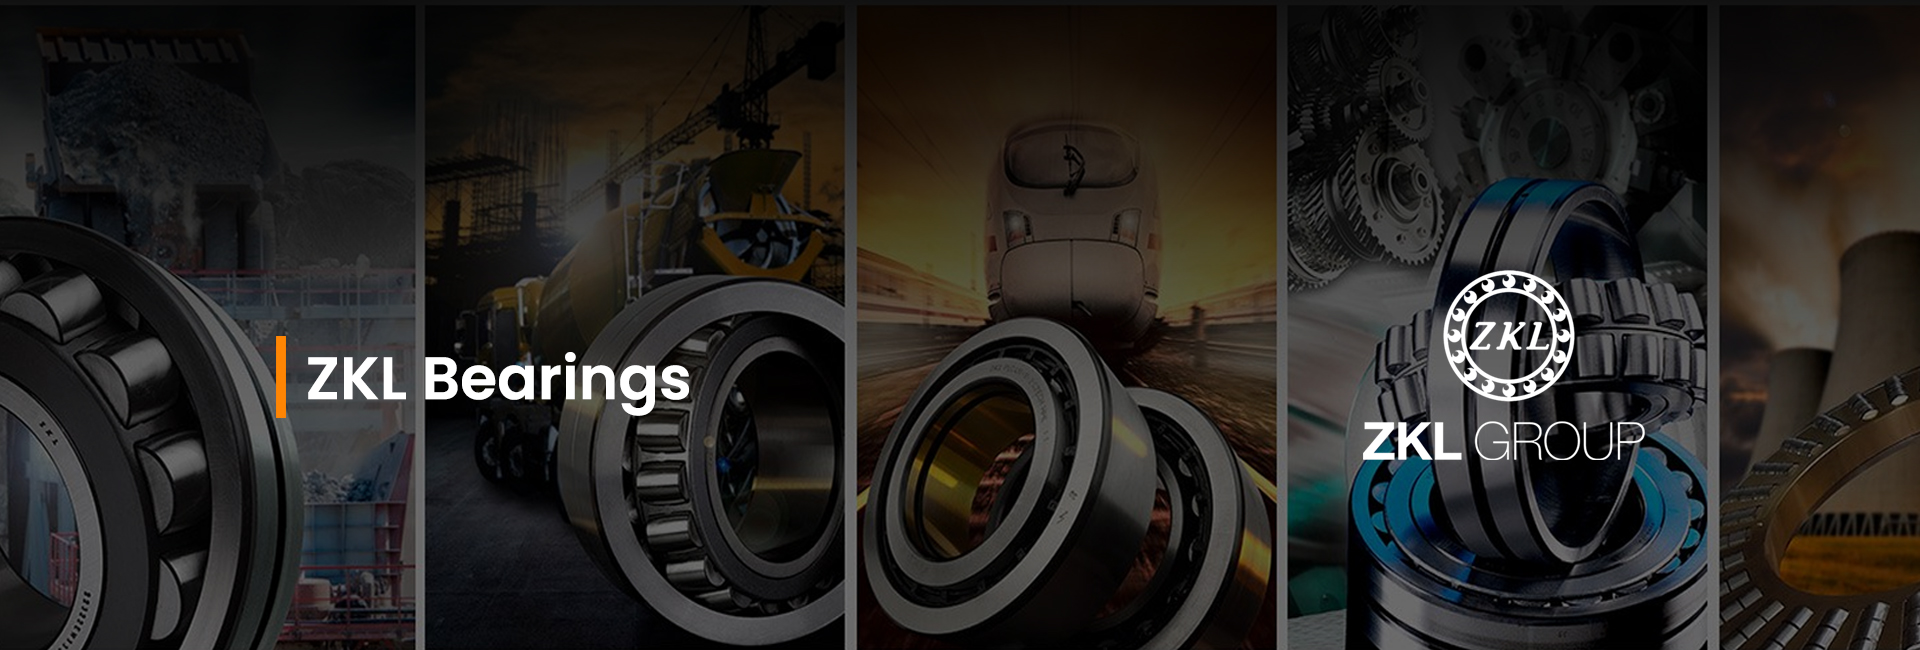 zkl bearing supplier in ahmedabad